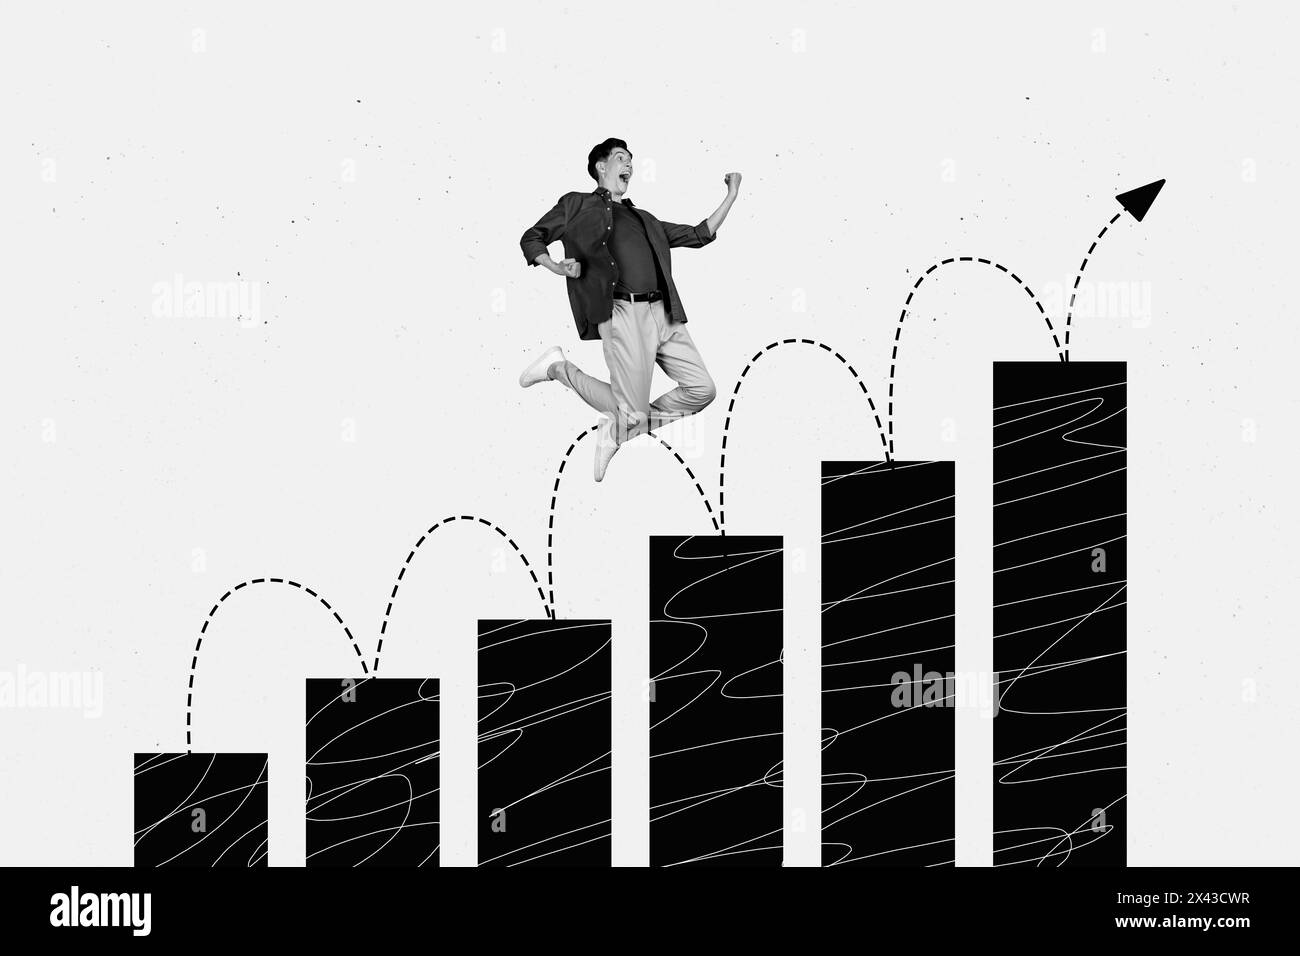 3D collage artwork sketch image of silhouette young confident man jump on career stairs up arrow show diretion motivated active worker Stock Photo